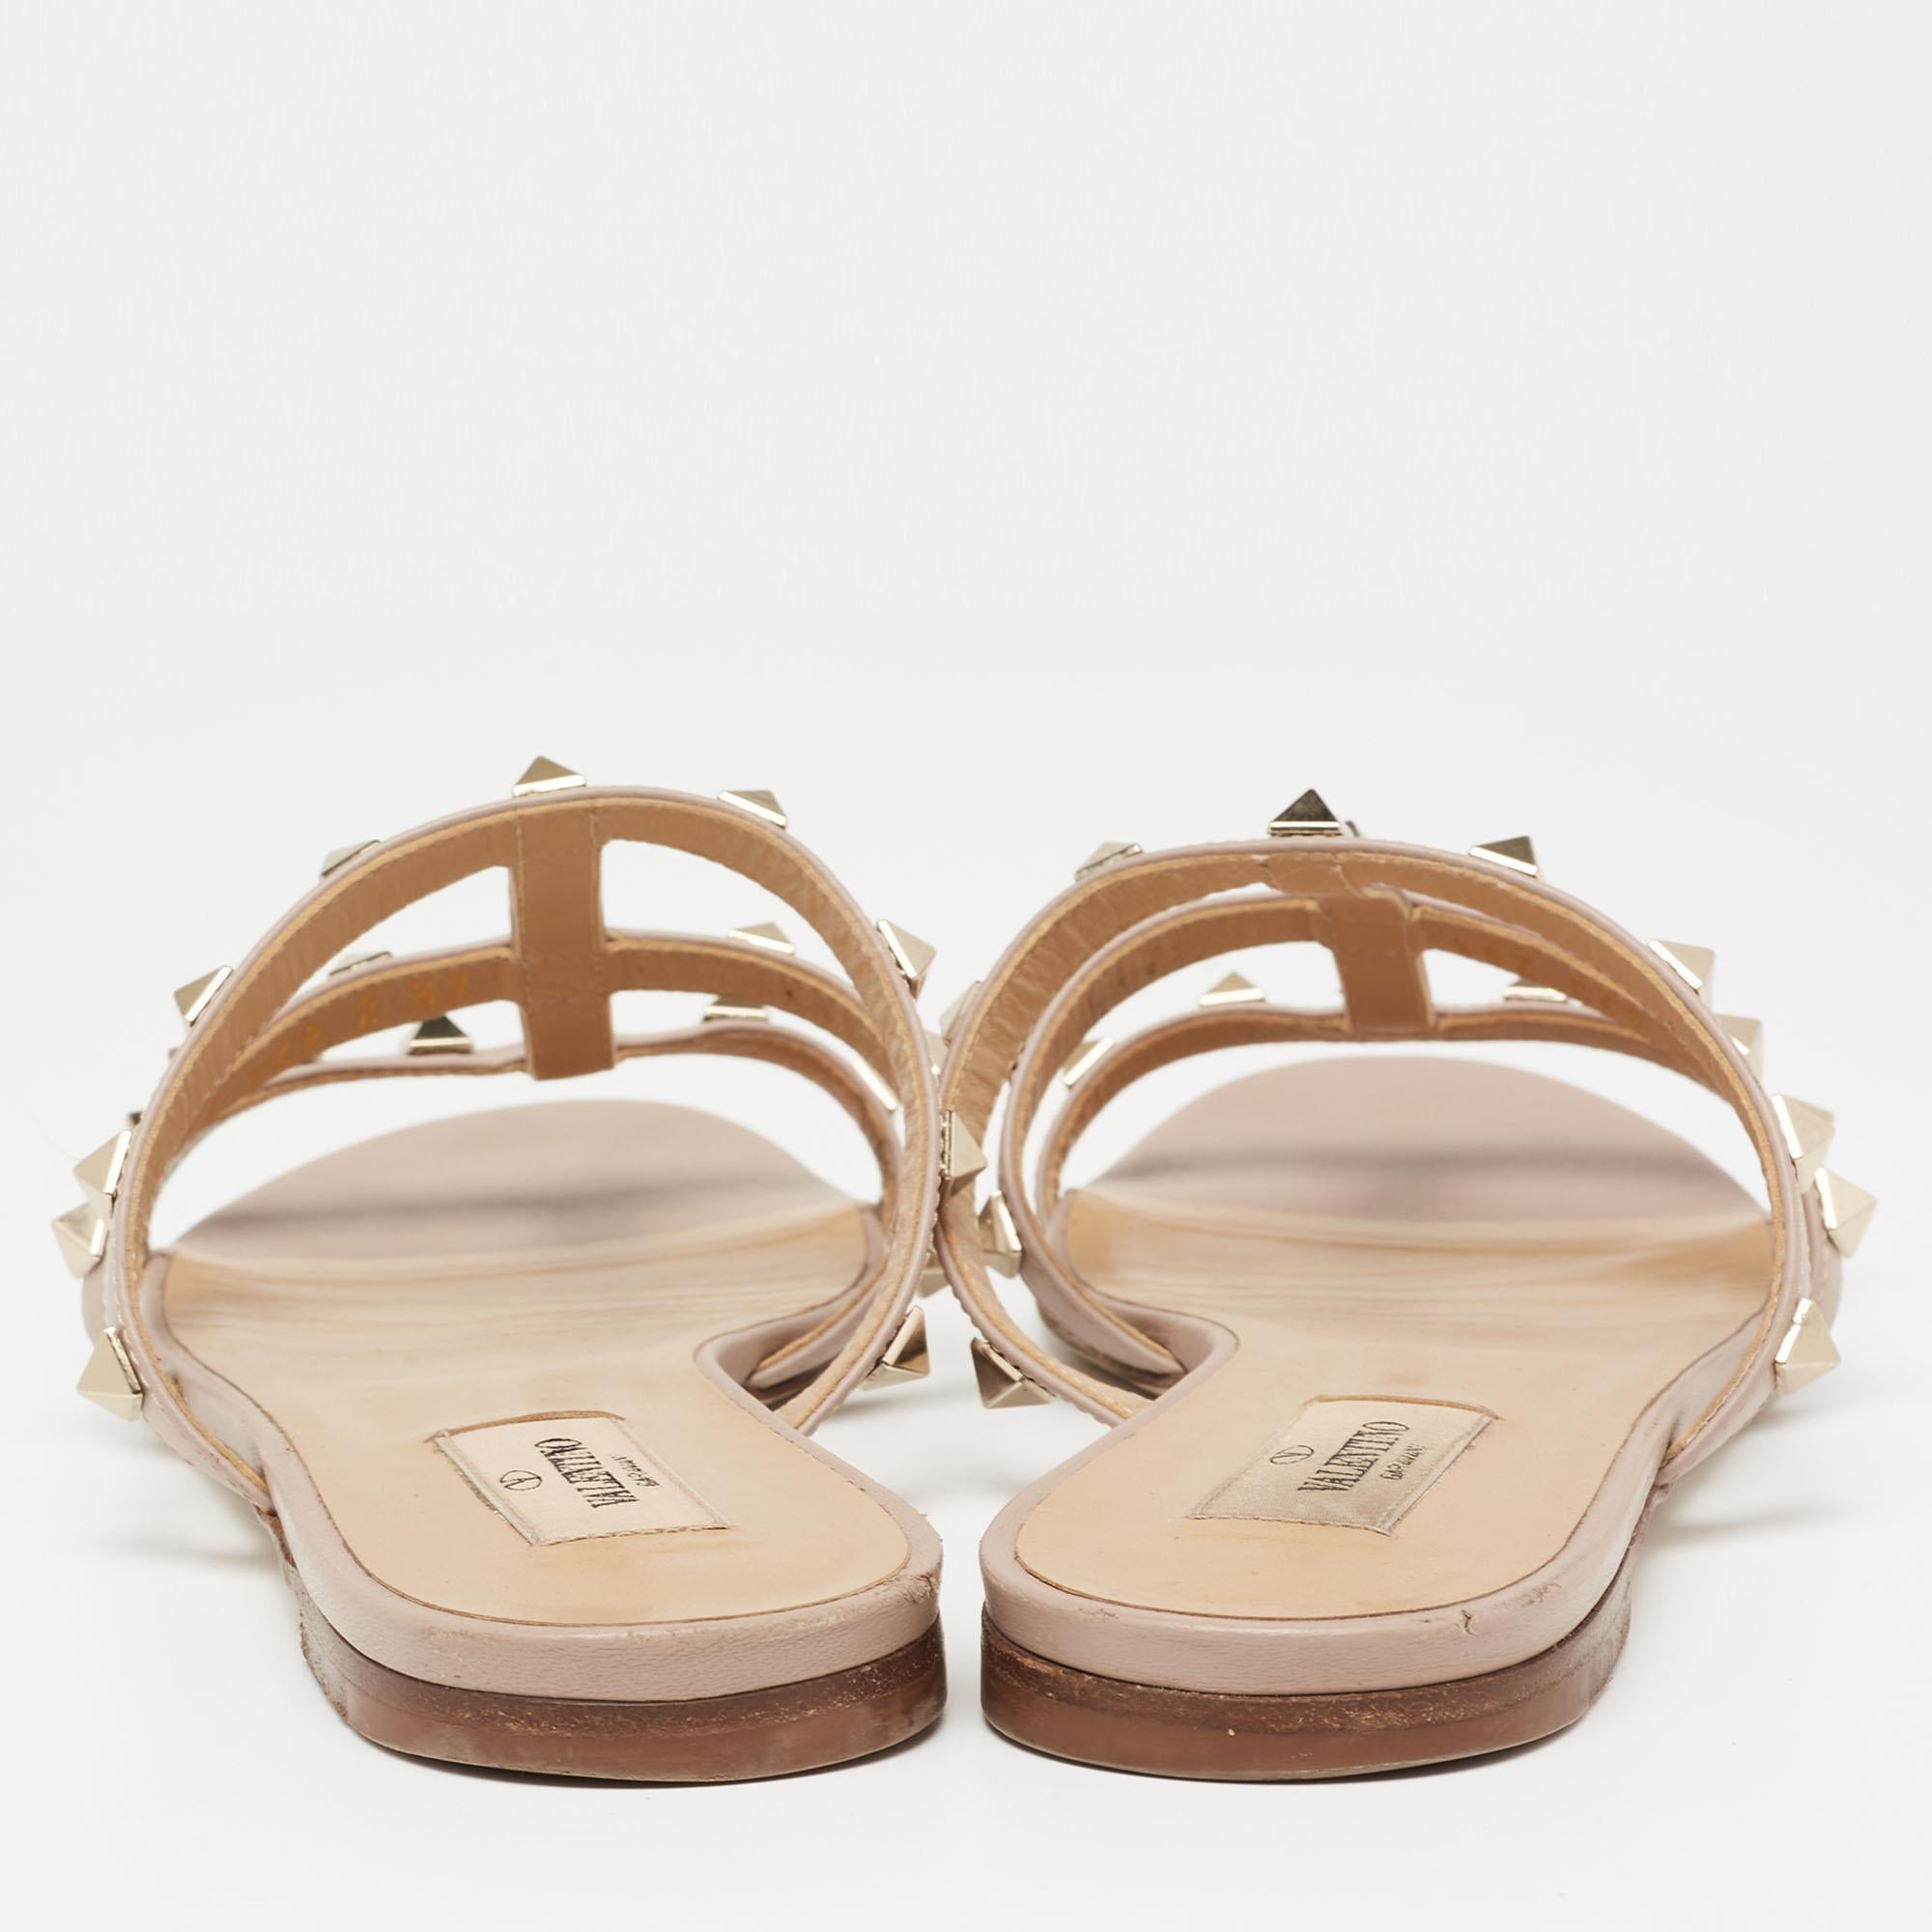 Lend your feet comfort, signature beauty, and luxury with these stunning slide sandals from Valentino. They are crafted using dusty-pink leather, with Rockstud embellishments perched on the upper. They flaunt gold-tone hardware and a slip-on style.